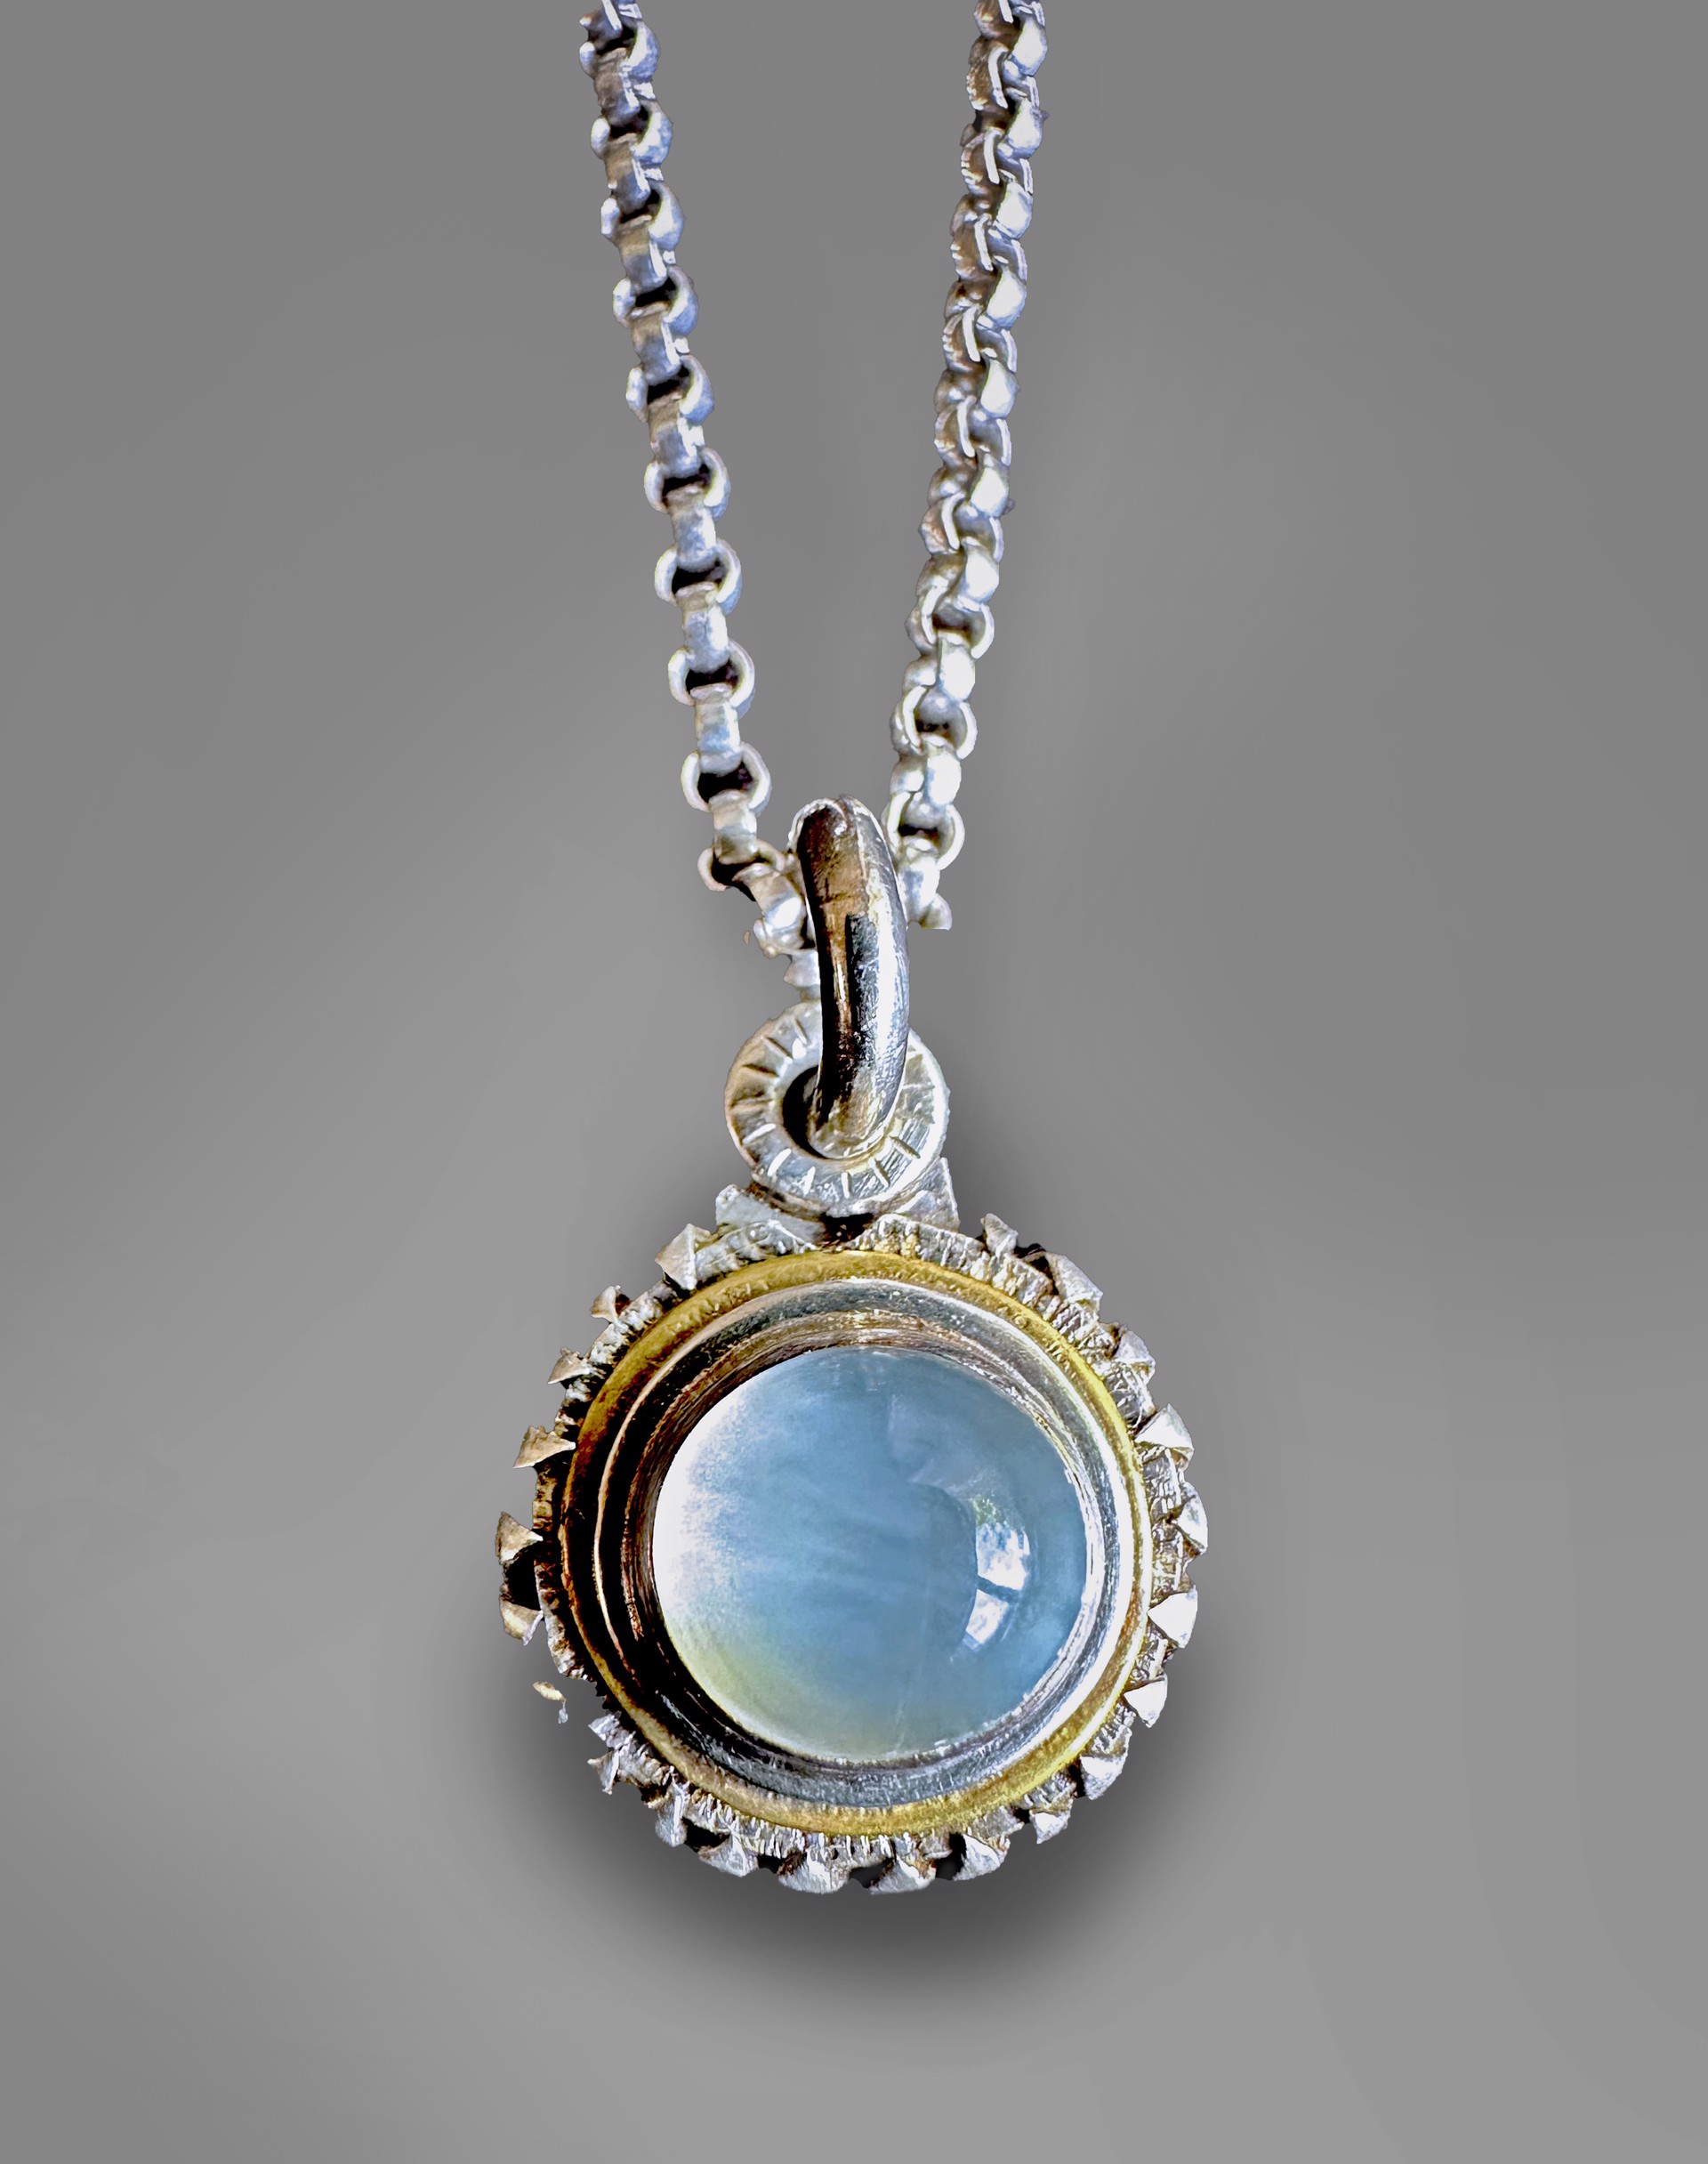 Enchanted Orb Pendant with Moonstone by Tabor Porter